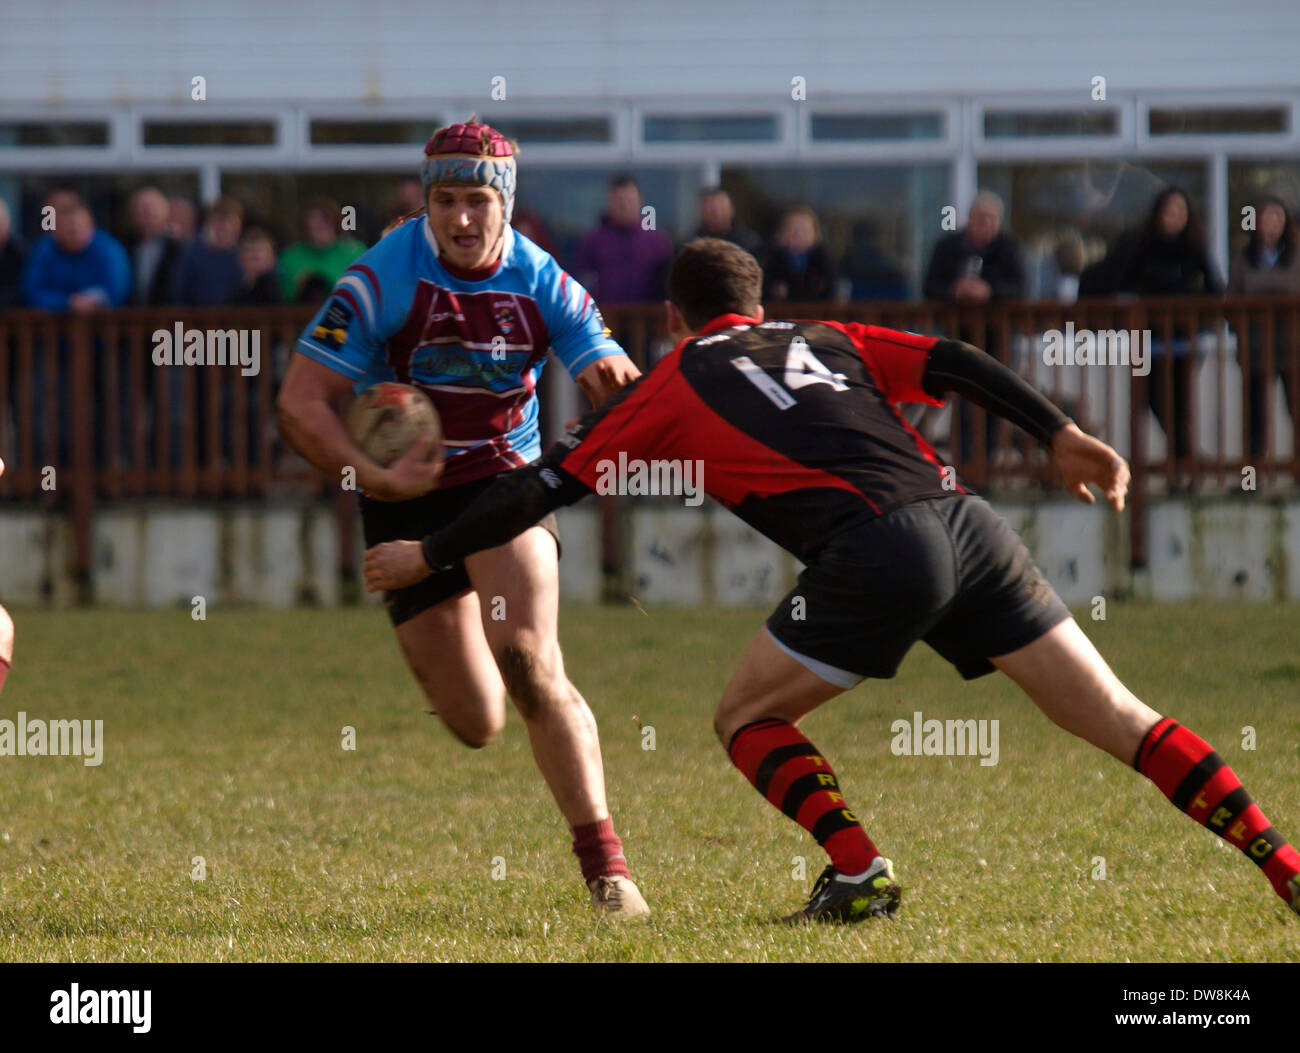 Amateur rugby player carrying the ball, Bude, Cornwall, UK Stock Photo